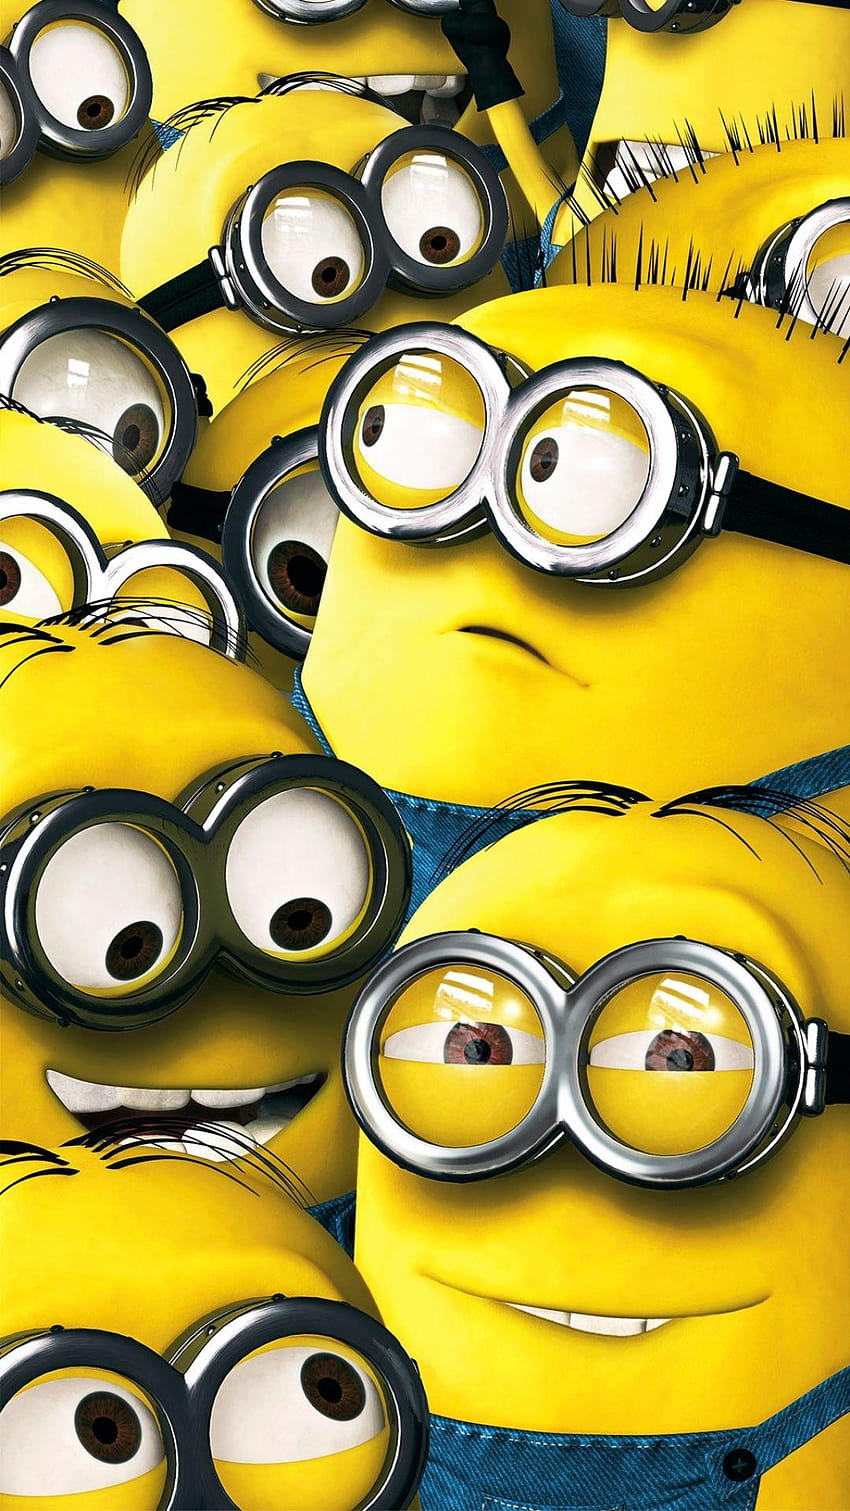 Despicable Me Minion iPhone, iphone minions HD phone wallpaper ...